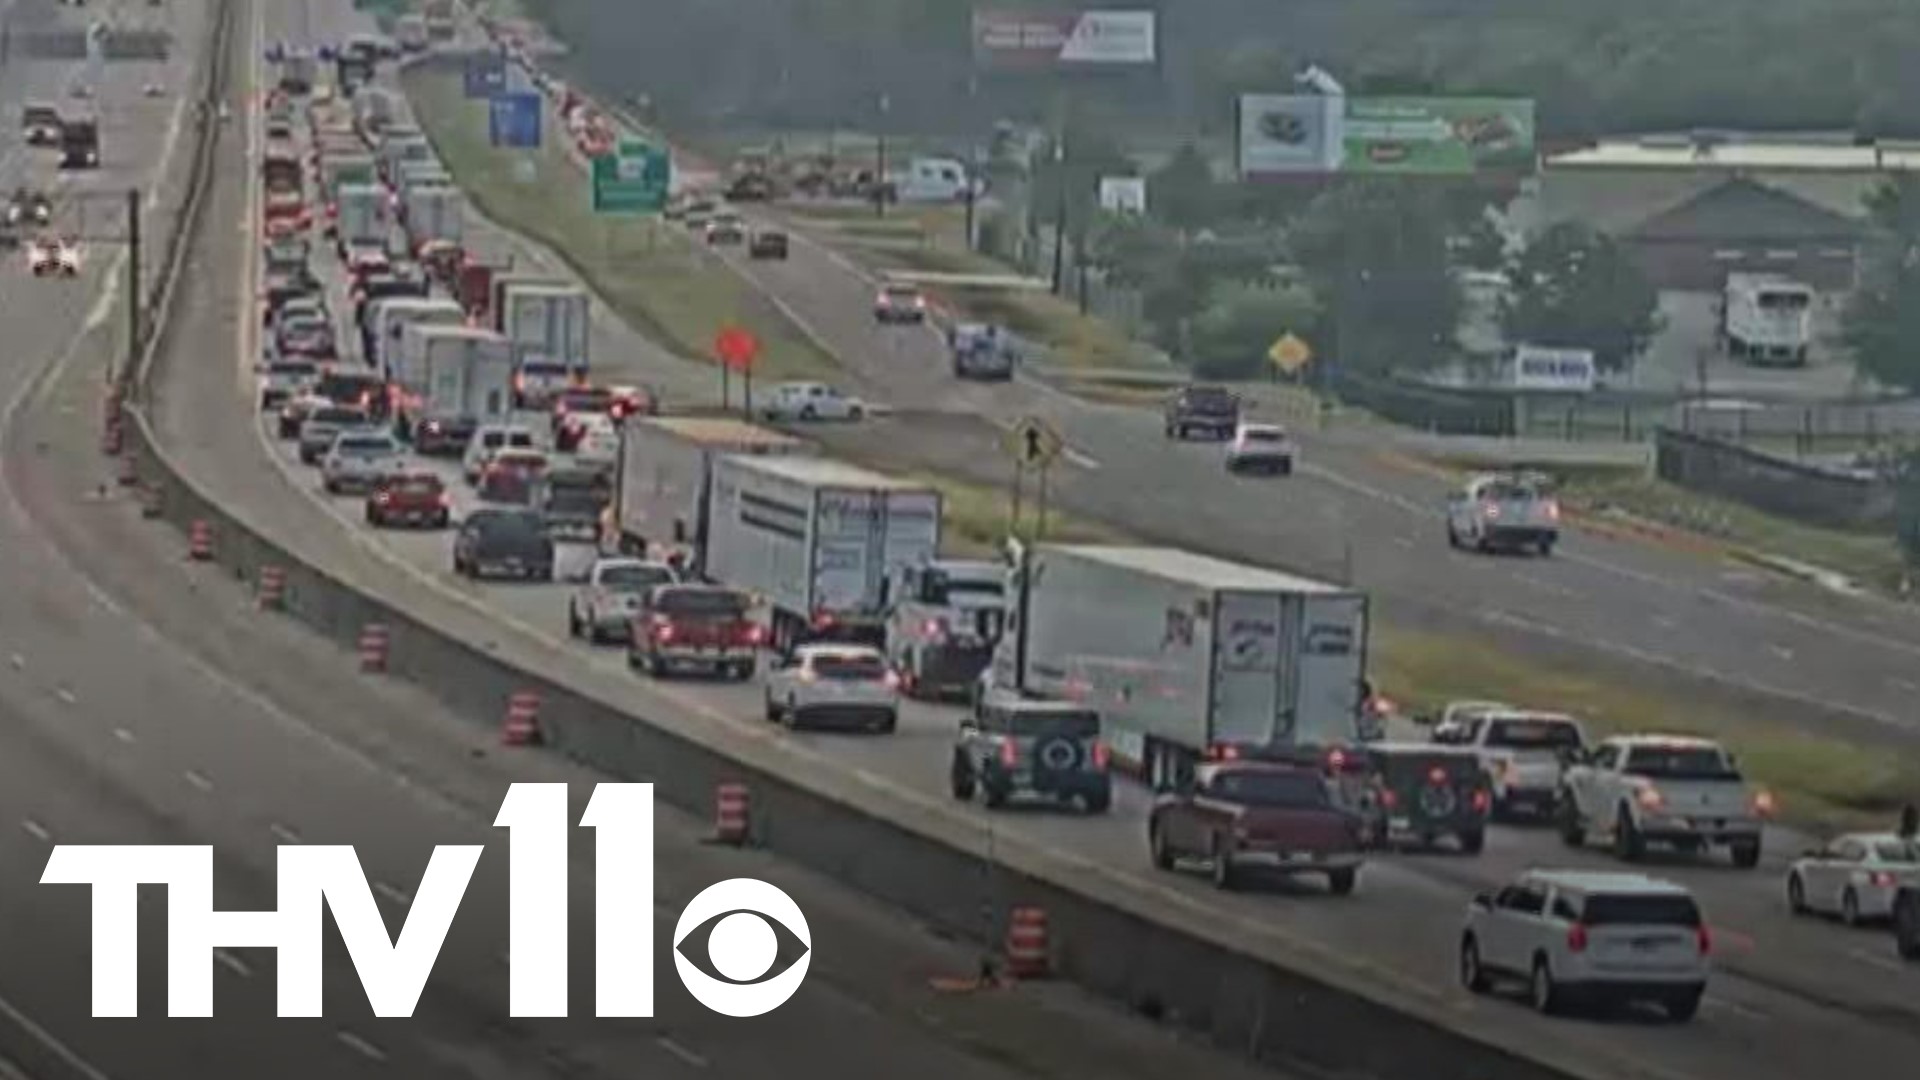 If you have a destination in mind to watch the eclipse, you might want to get a head start! Traffic is expected to start picking up around mid-morning.